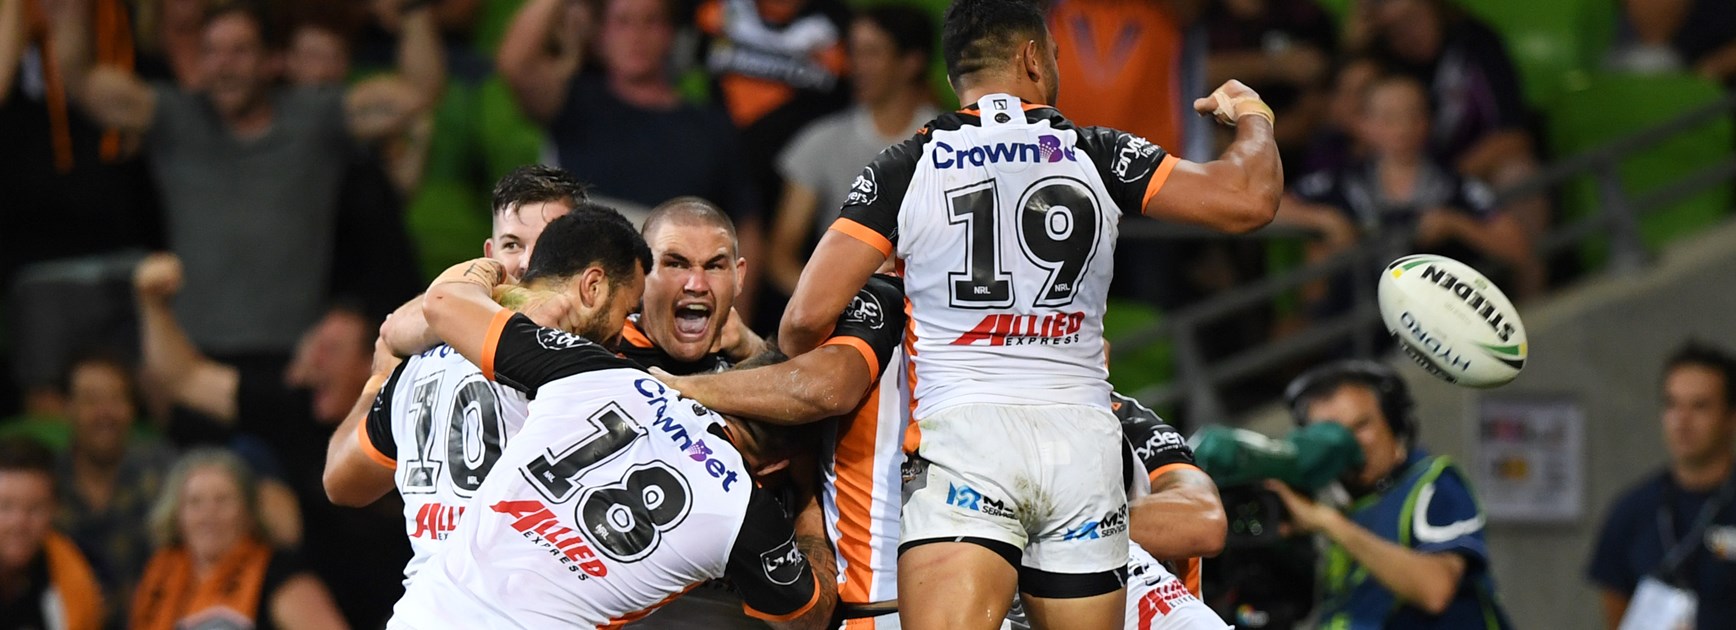 Tigers players celebrate wildly after beating the Storm.